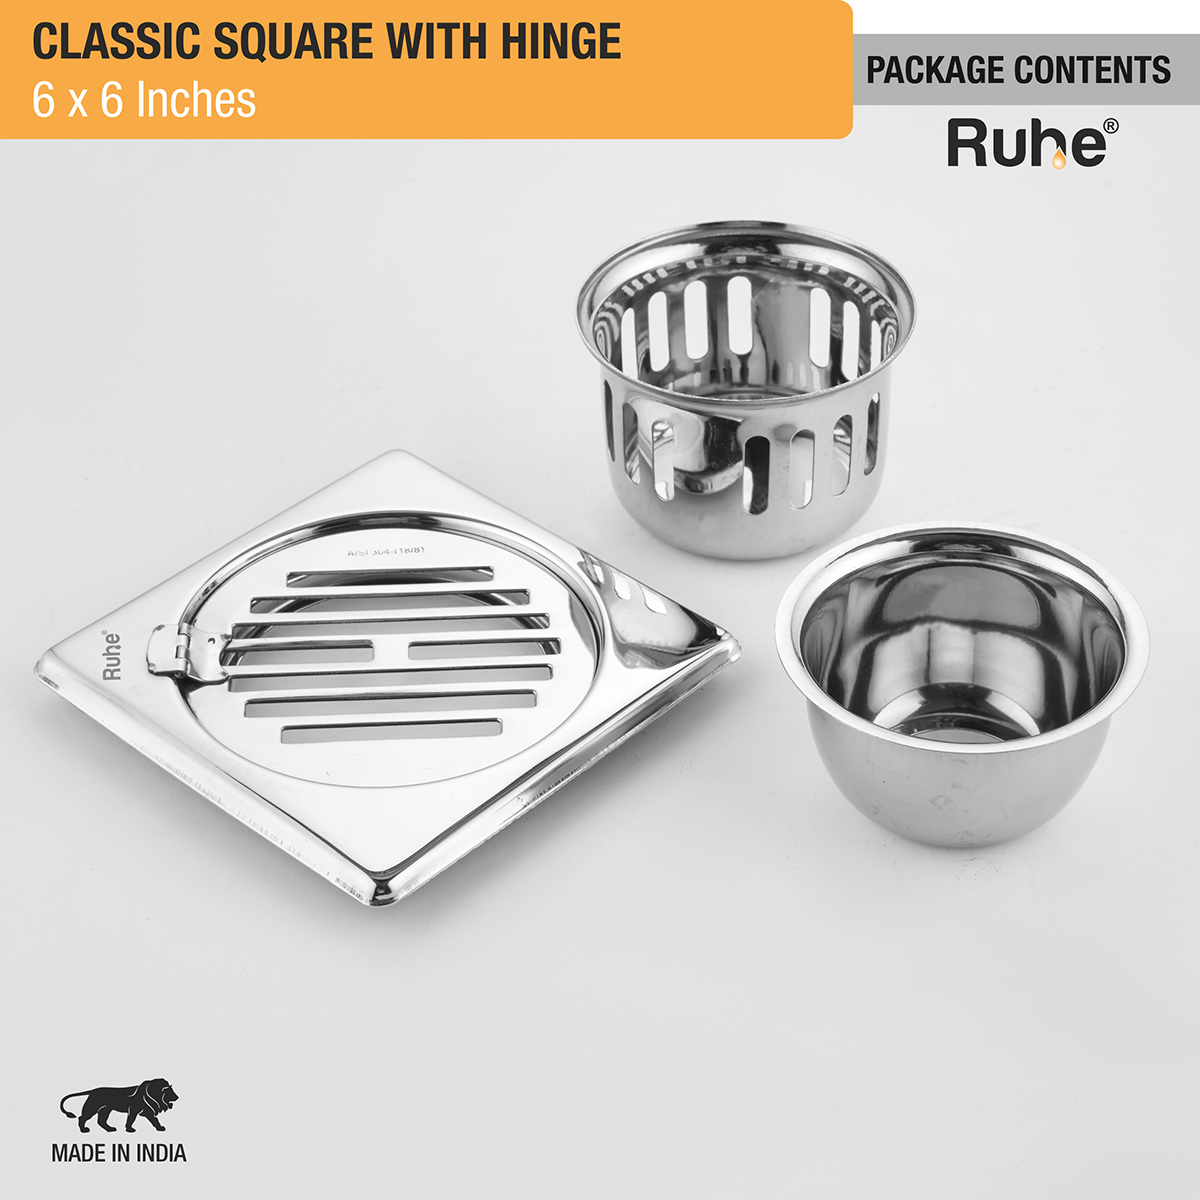 Classic Square Floor Drain (6 x 6 Inches) with Hinge & Cockroach Trap (304 Grade) package content